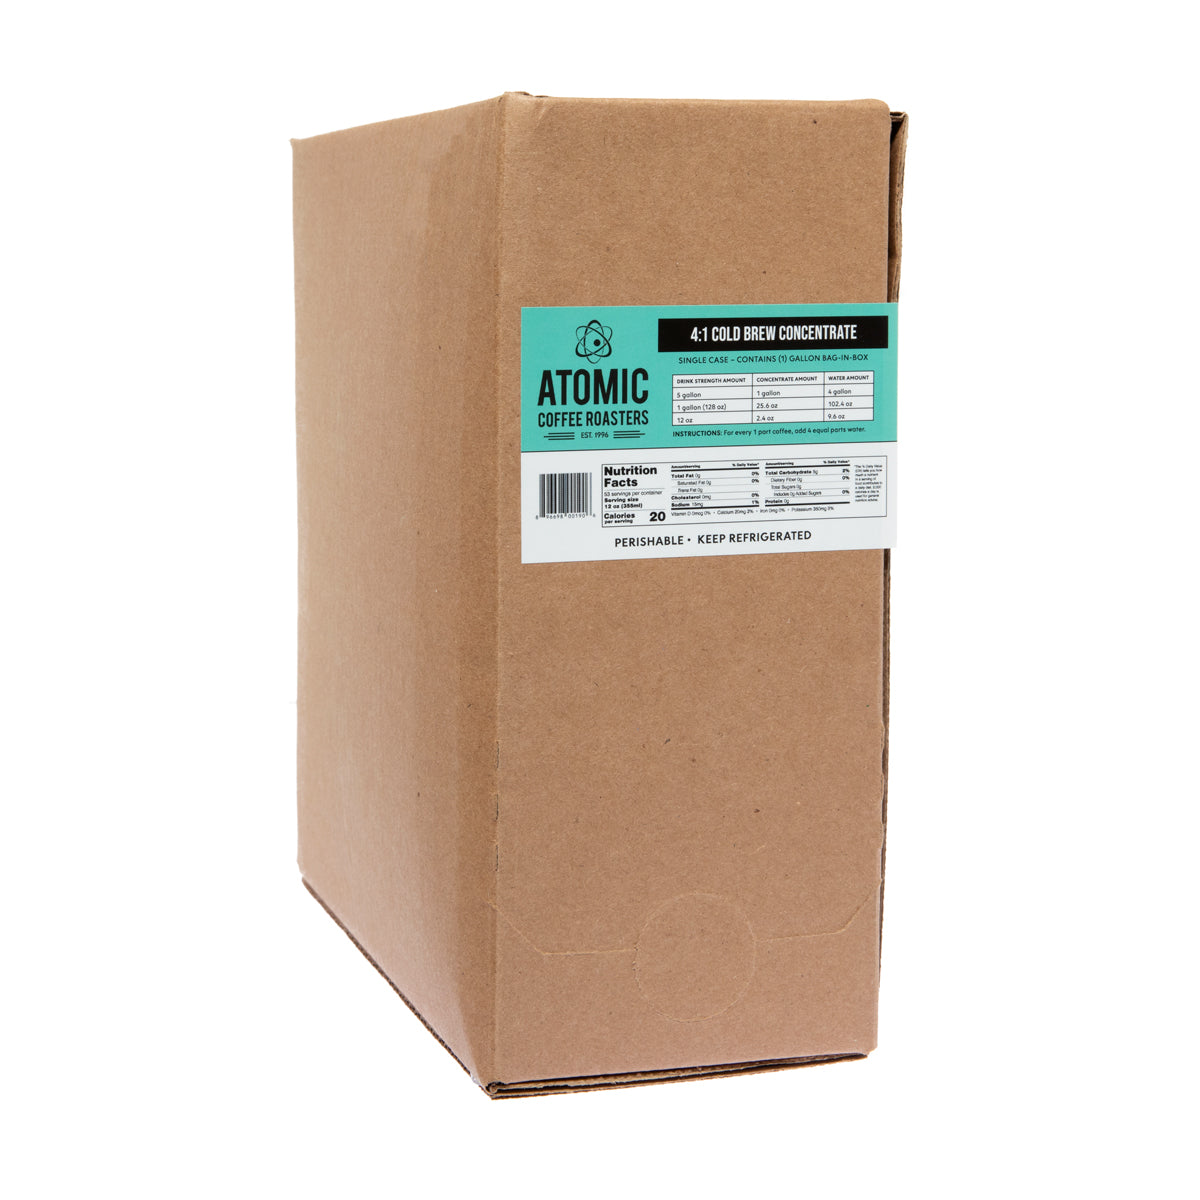 Atomic Coffee Roasters Cold Brew Concentrate 1 Gal Box